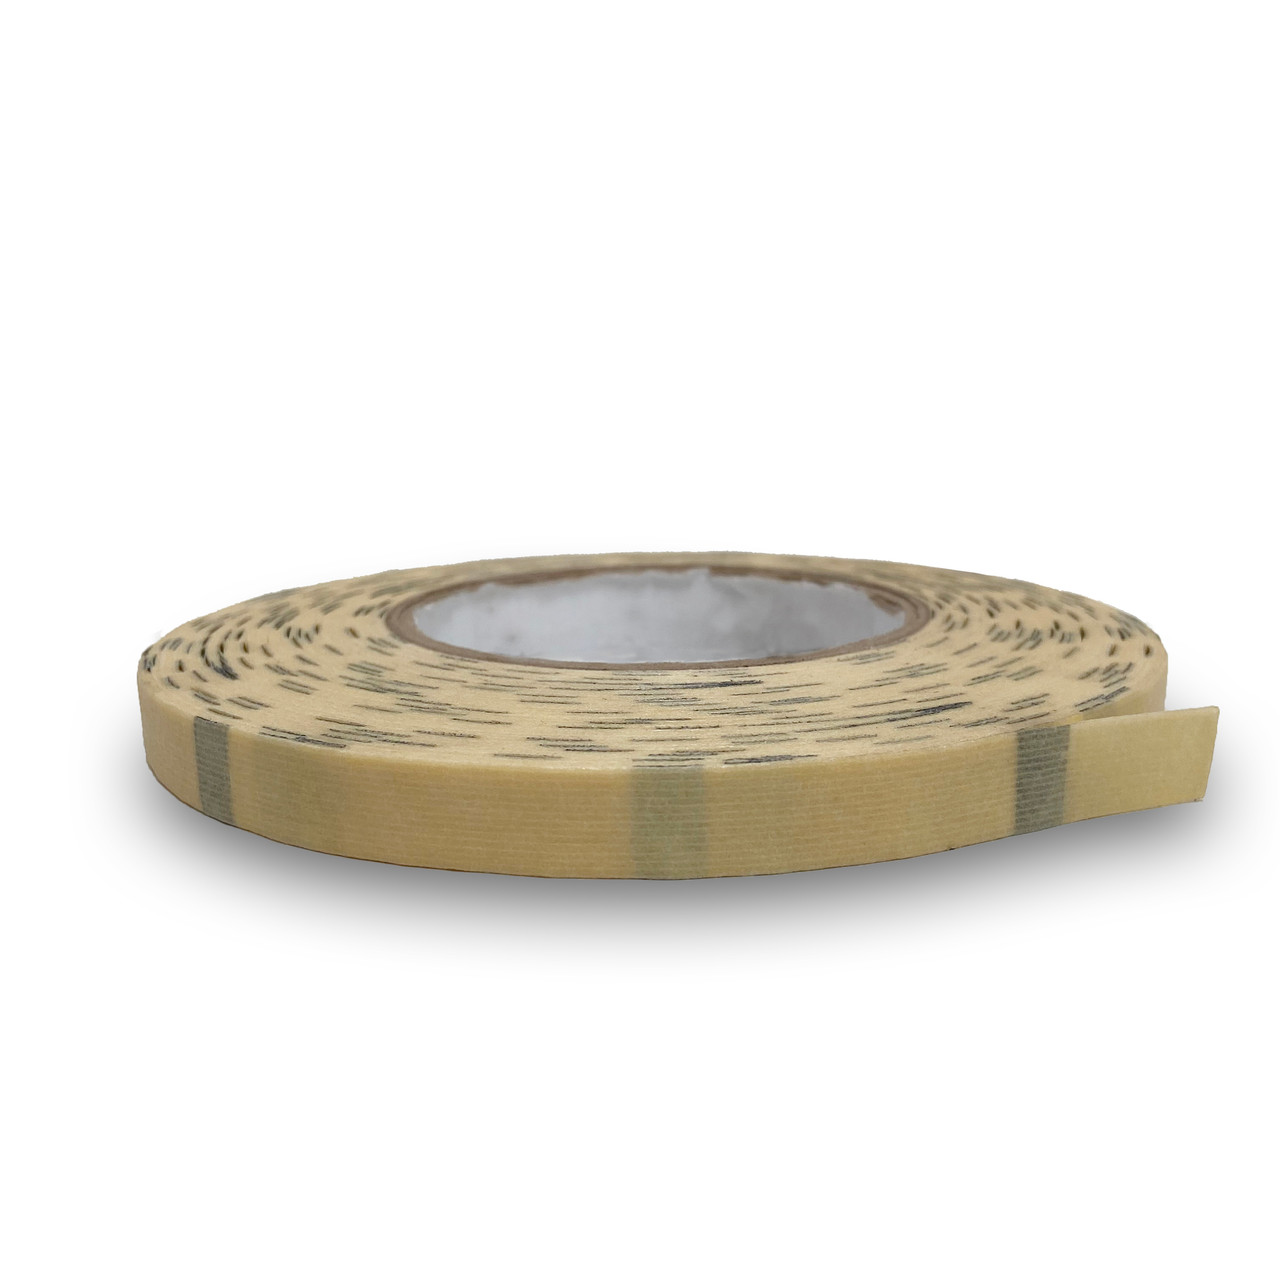 Printed Grout Tape 1/2"x55yds 4" Repeat (96 Roll Case/ $7.99 Per Roll)